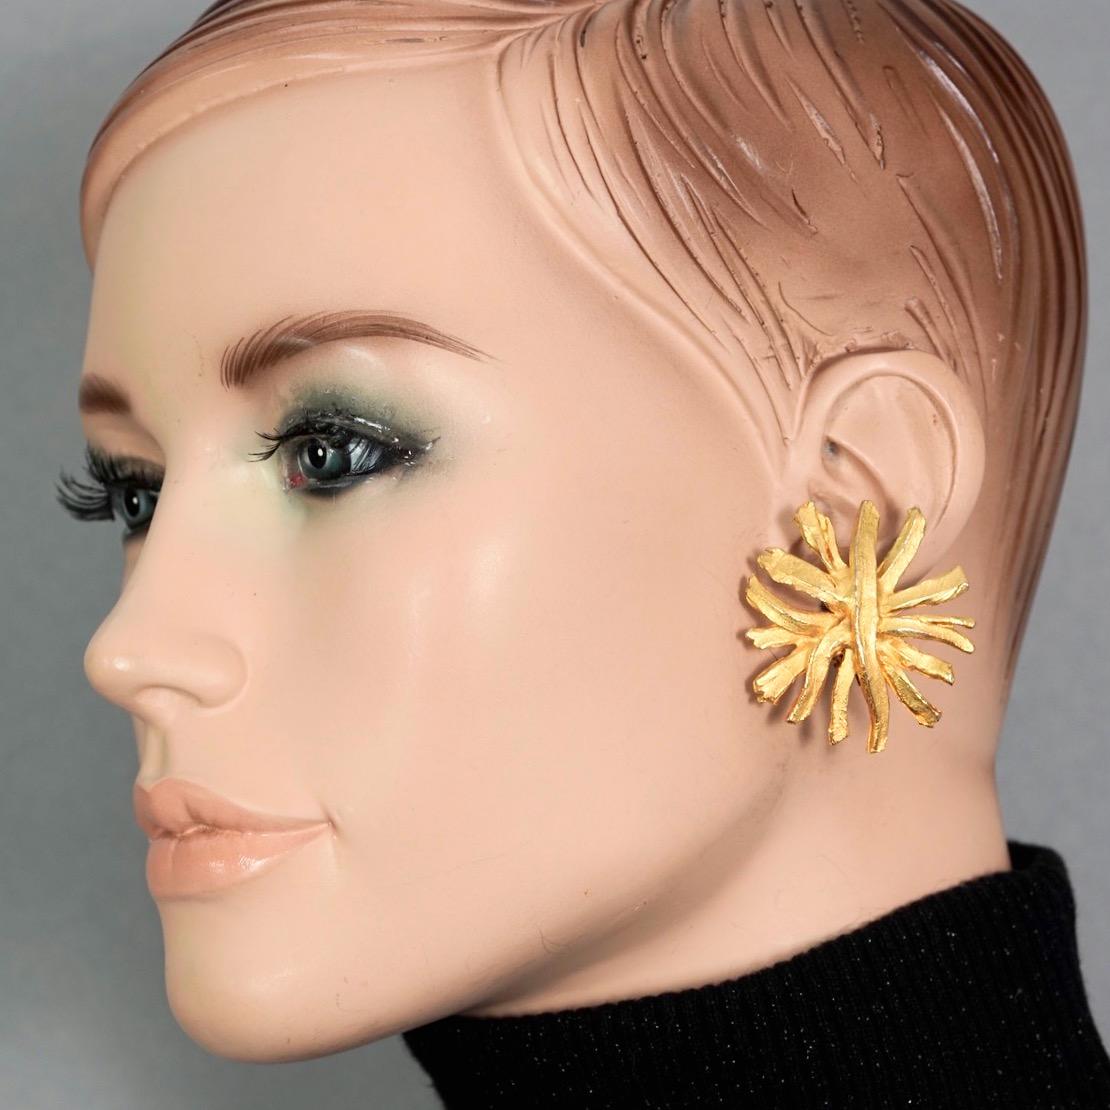 Vintage EDOUARD RAMBAUD Sunburst Textured Earrings

Measurements:
Height: 1.69 inches (4.3 cm)
Width: 1.53 inches (3.9 cm)
Weight per Earring: 12 grams

Features:
- 100% Authentic EDOUARD RAMBAUD.
- Textured sunburst earrings.
- Gold tone